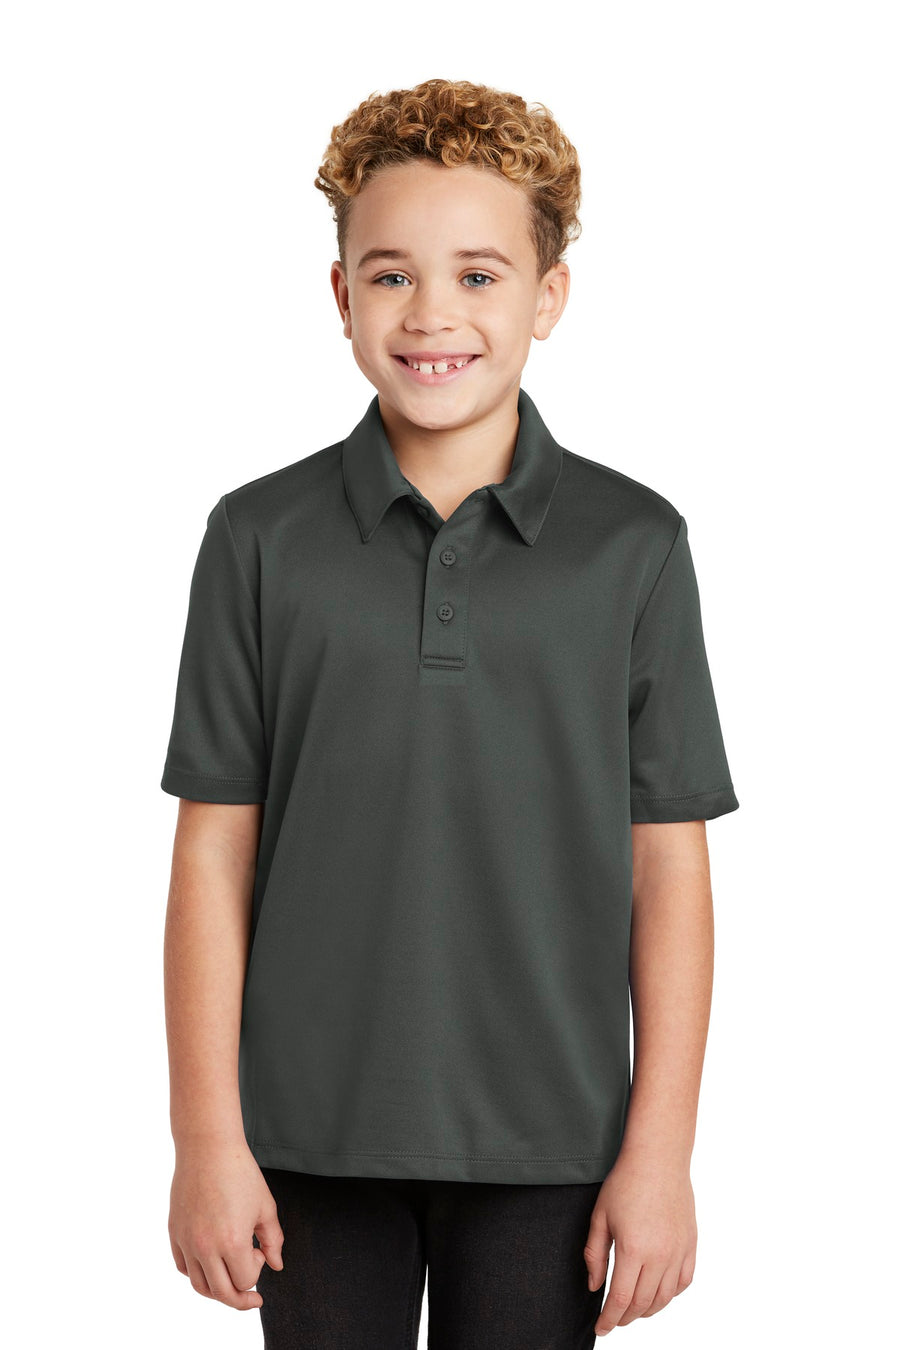 Port Authority Youth Silk Touch Performance Polo.